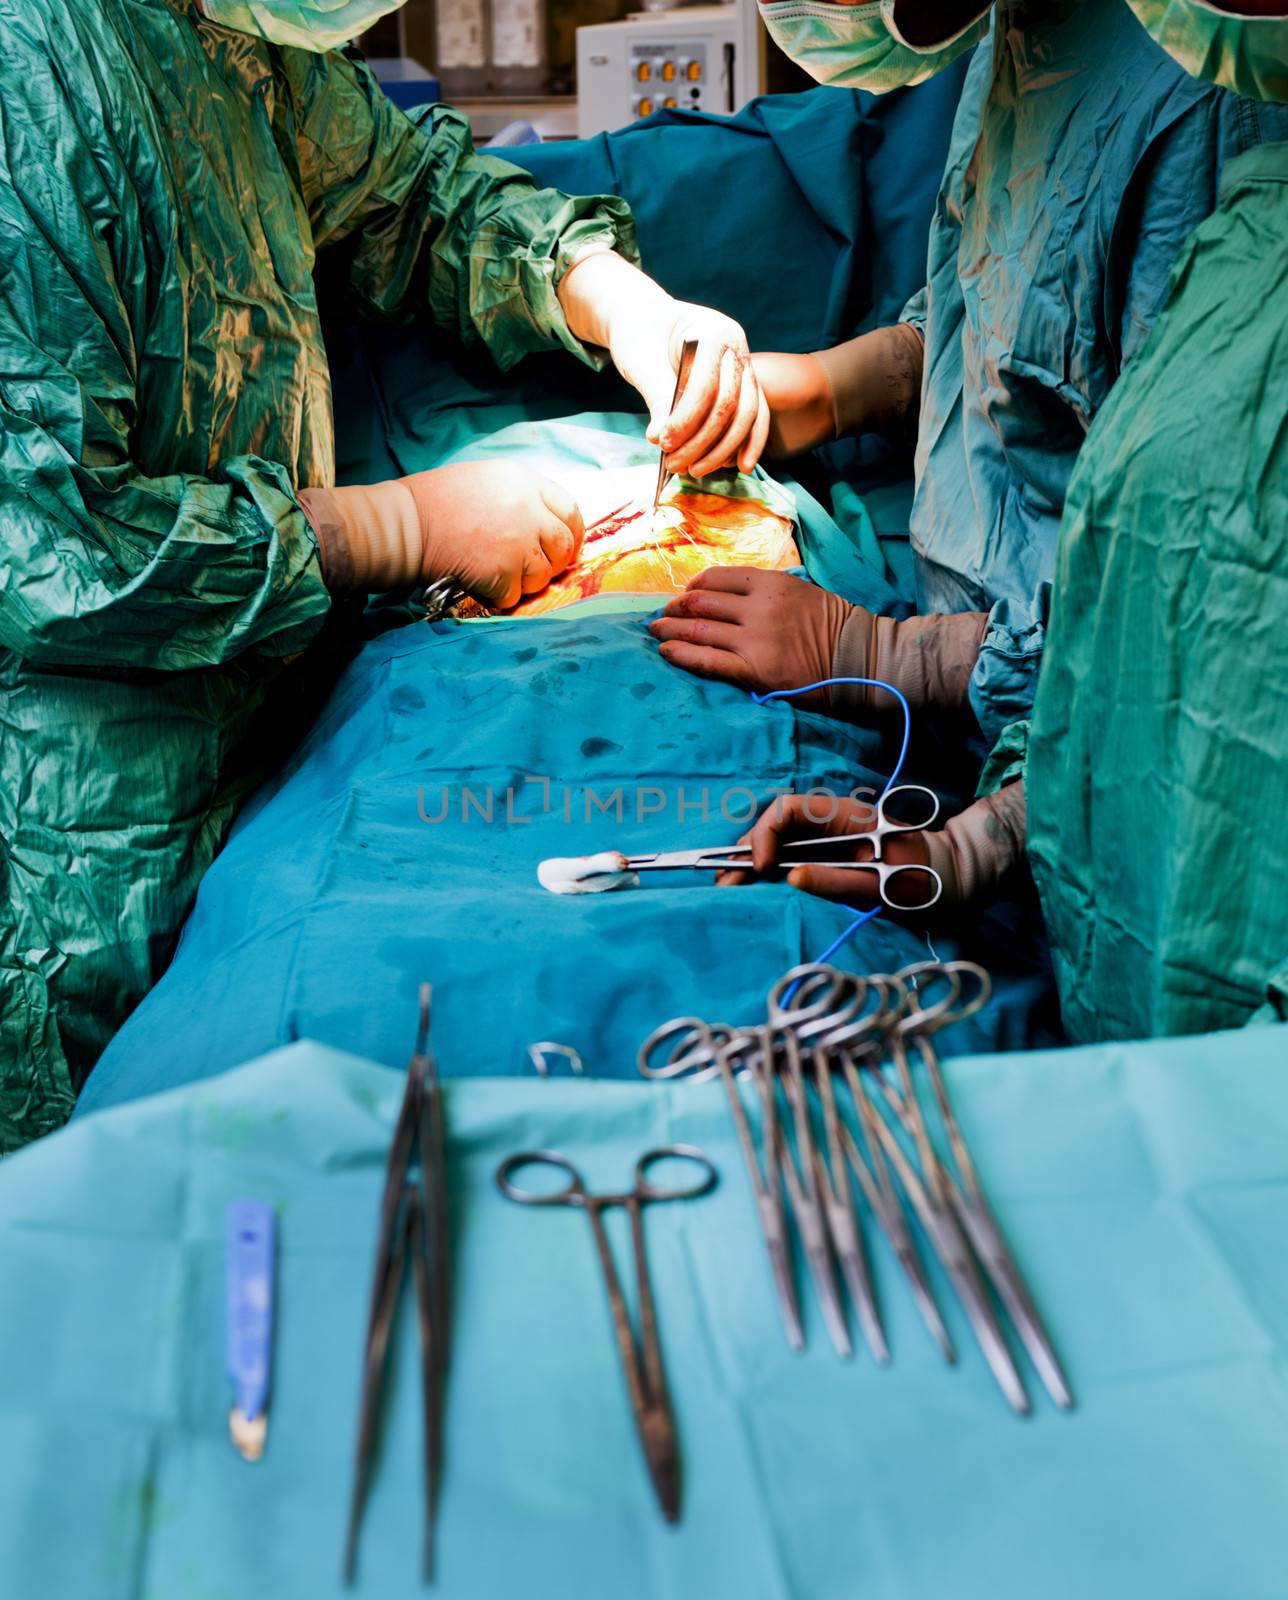 Doctors with medical uniforms performing cardiac surgery